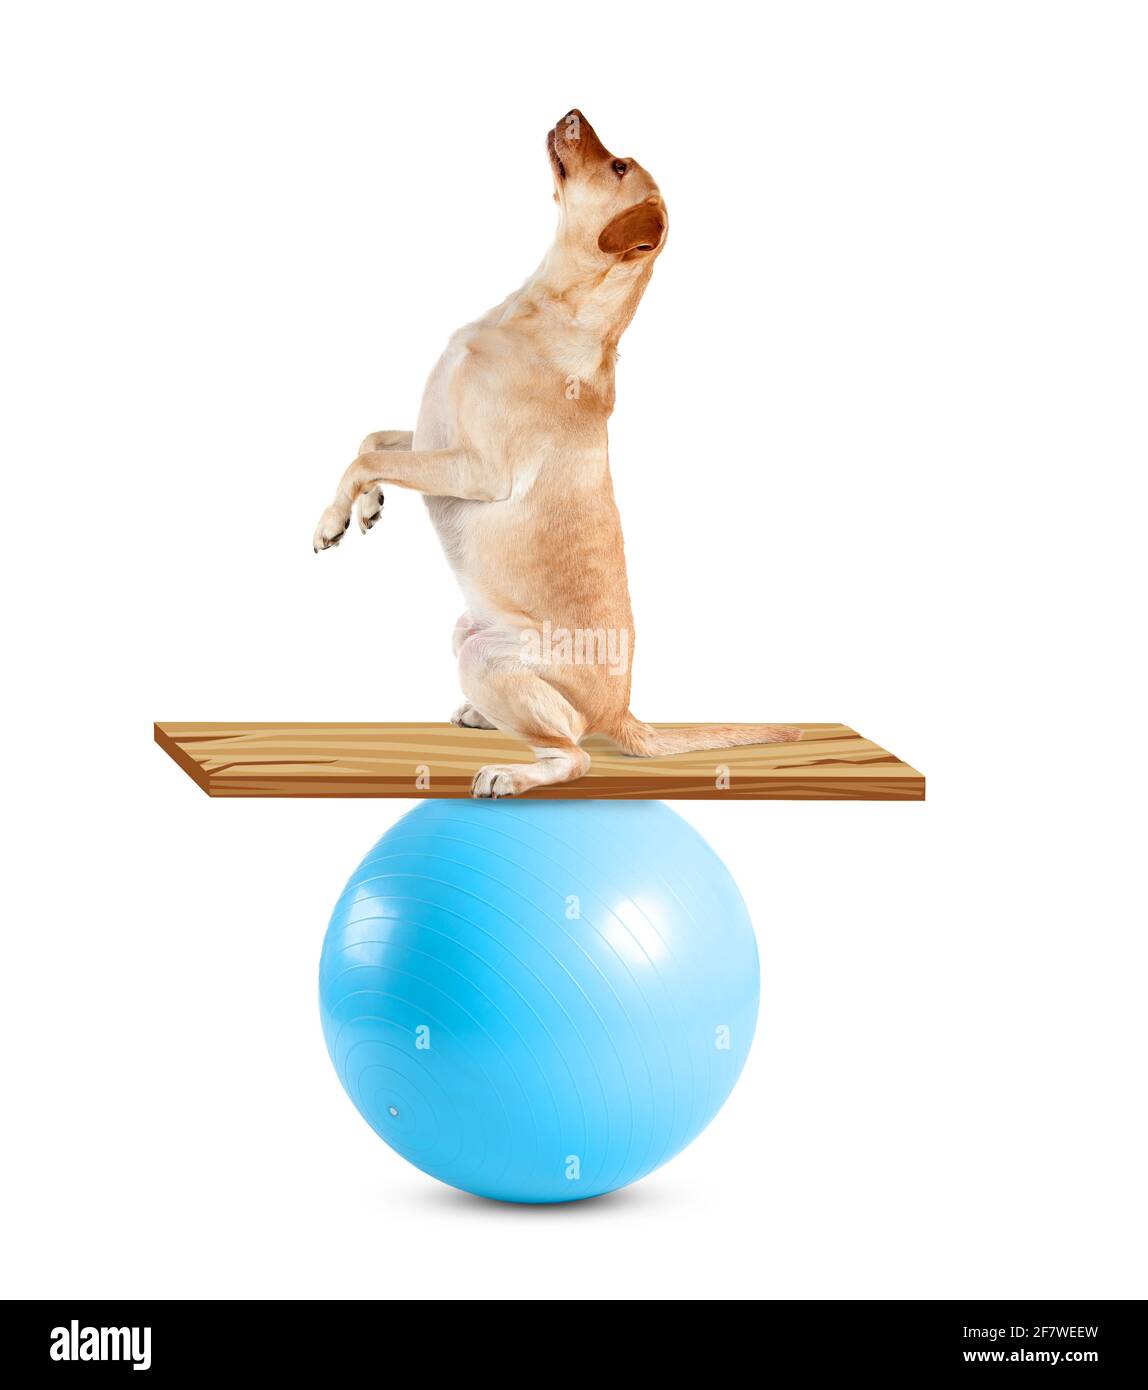 Circus dog showing balance trick with ball against white background Stock Photo